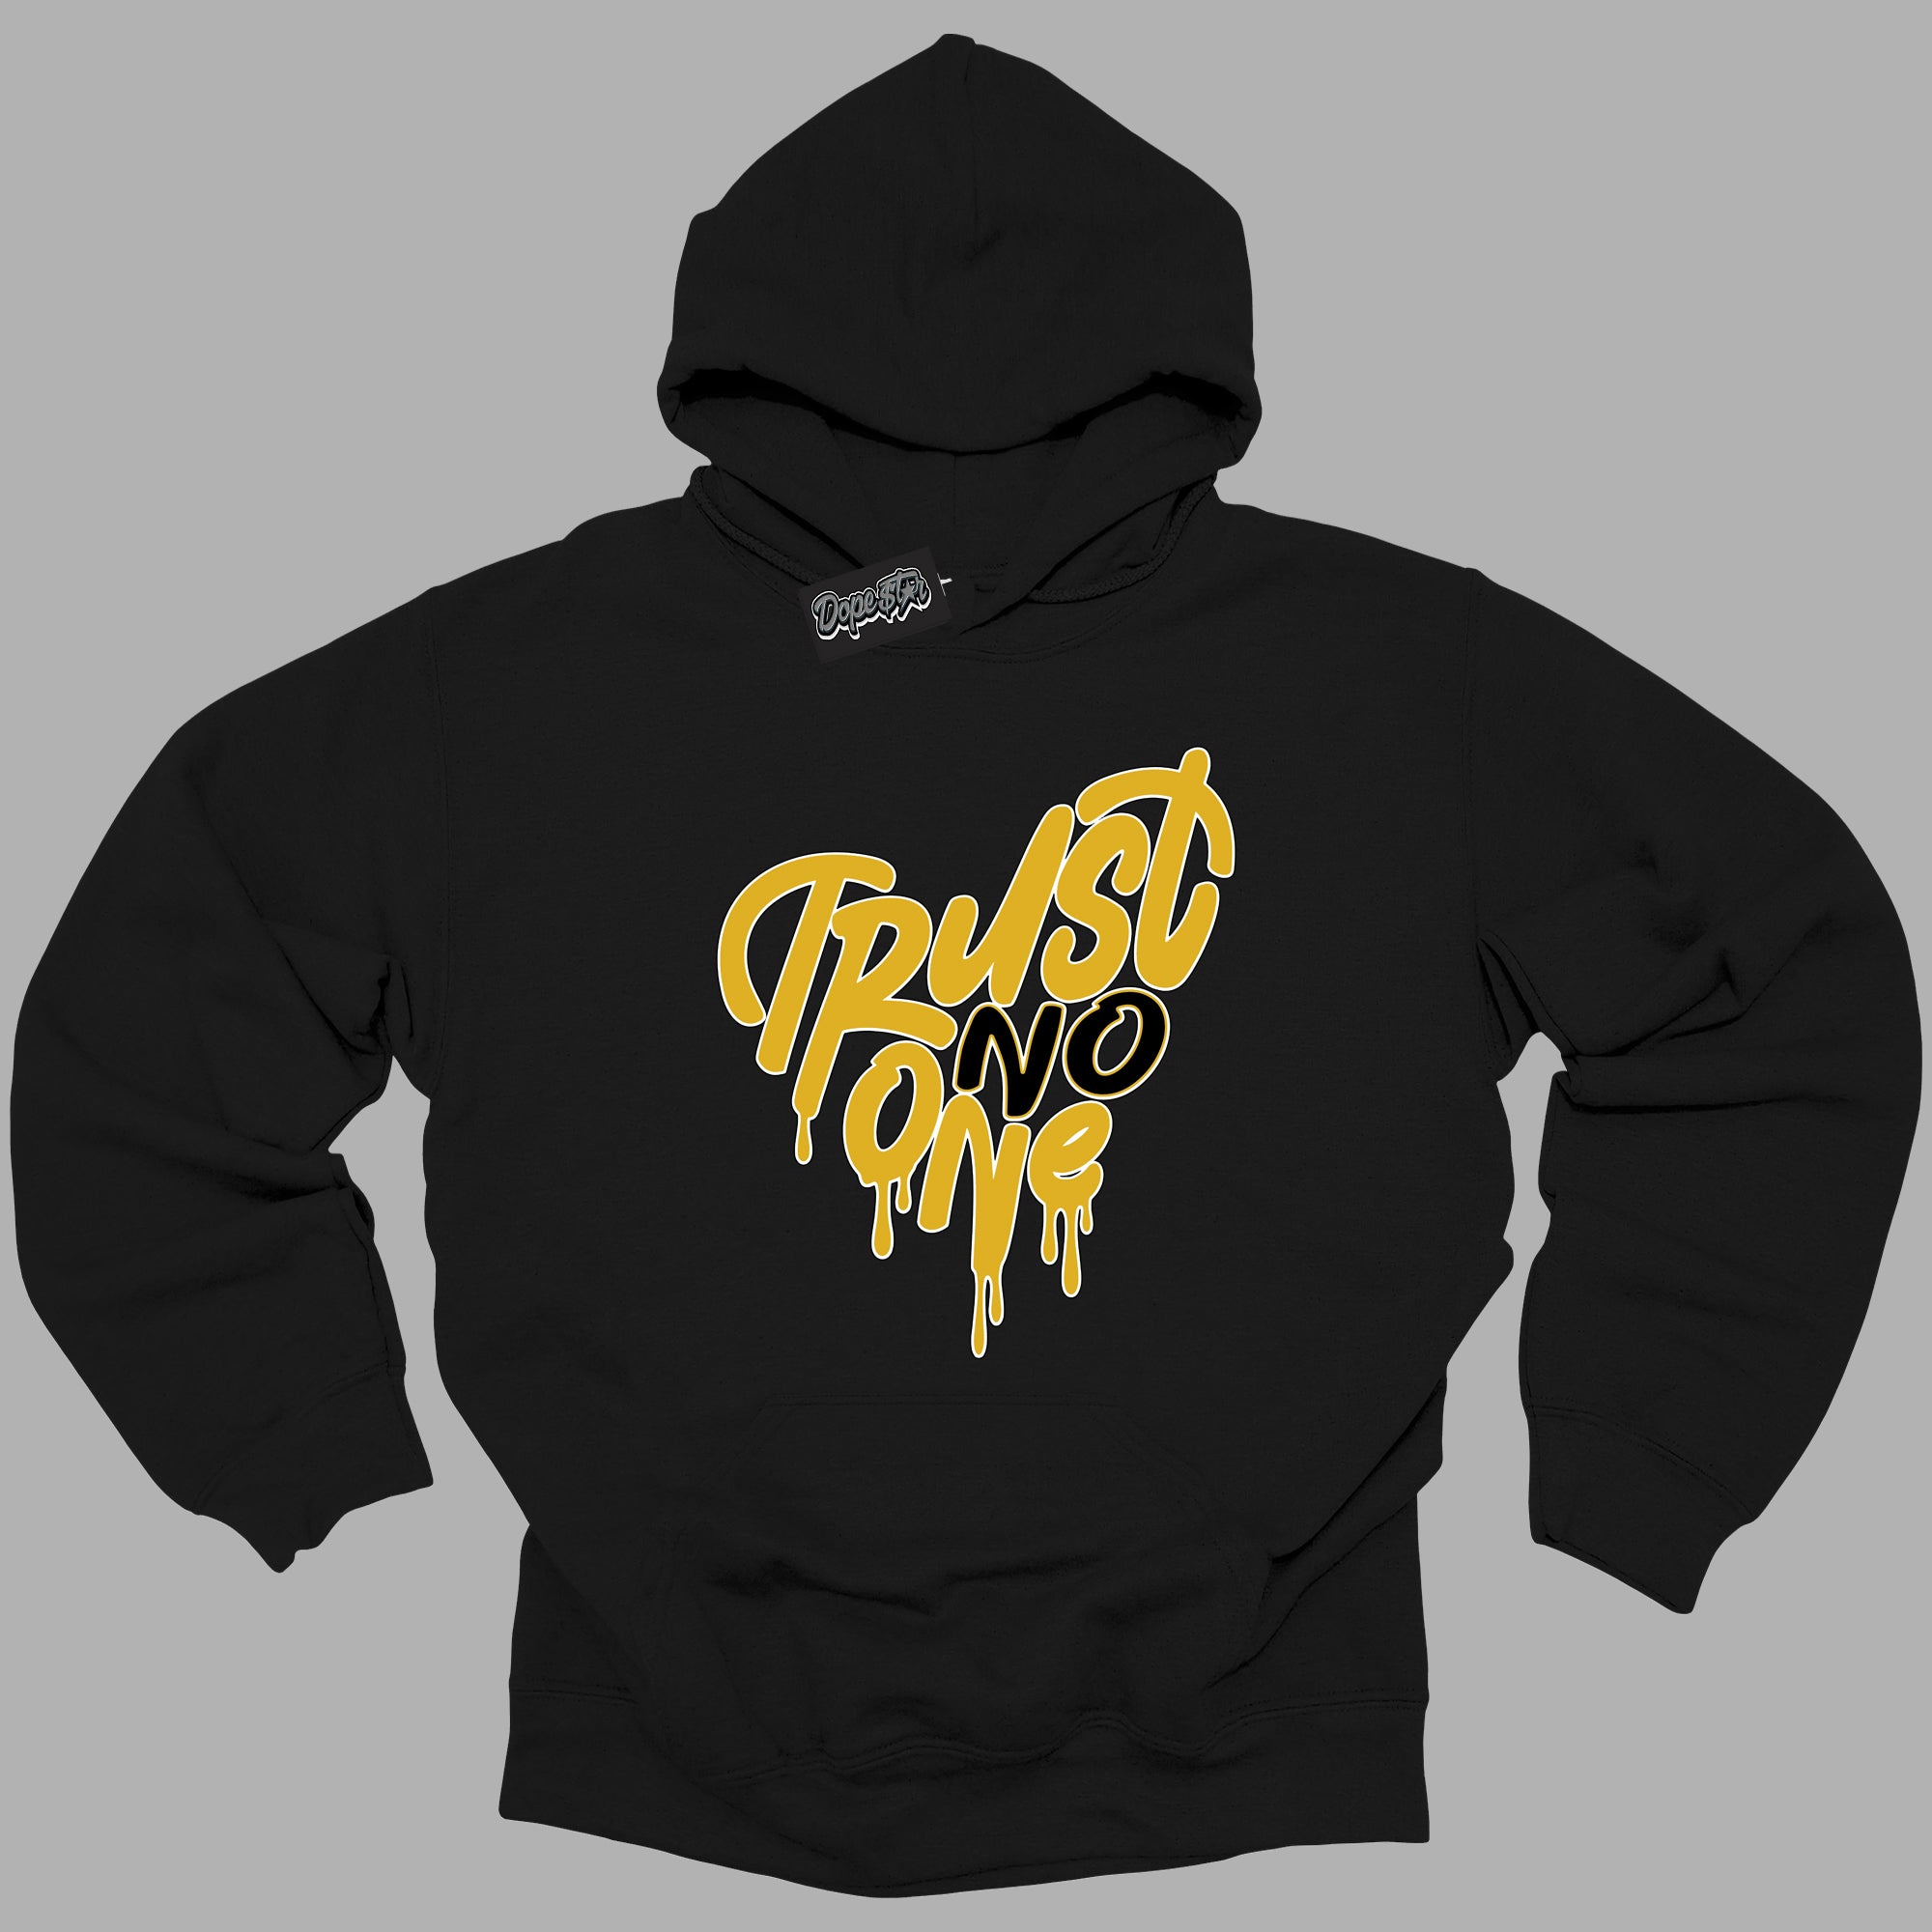 Cool Black Hoodie with “ Trust No One Heart ”  design that Perfectly Matches Yellow Ochre 6s Sneakers.